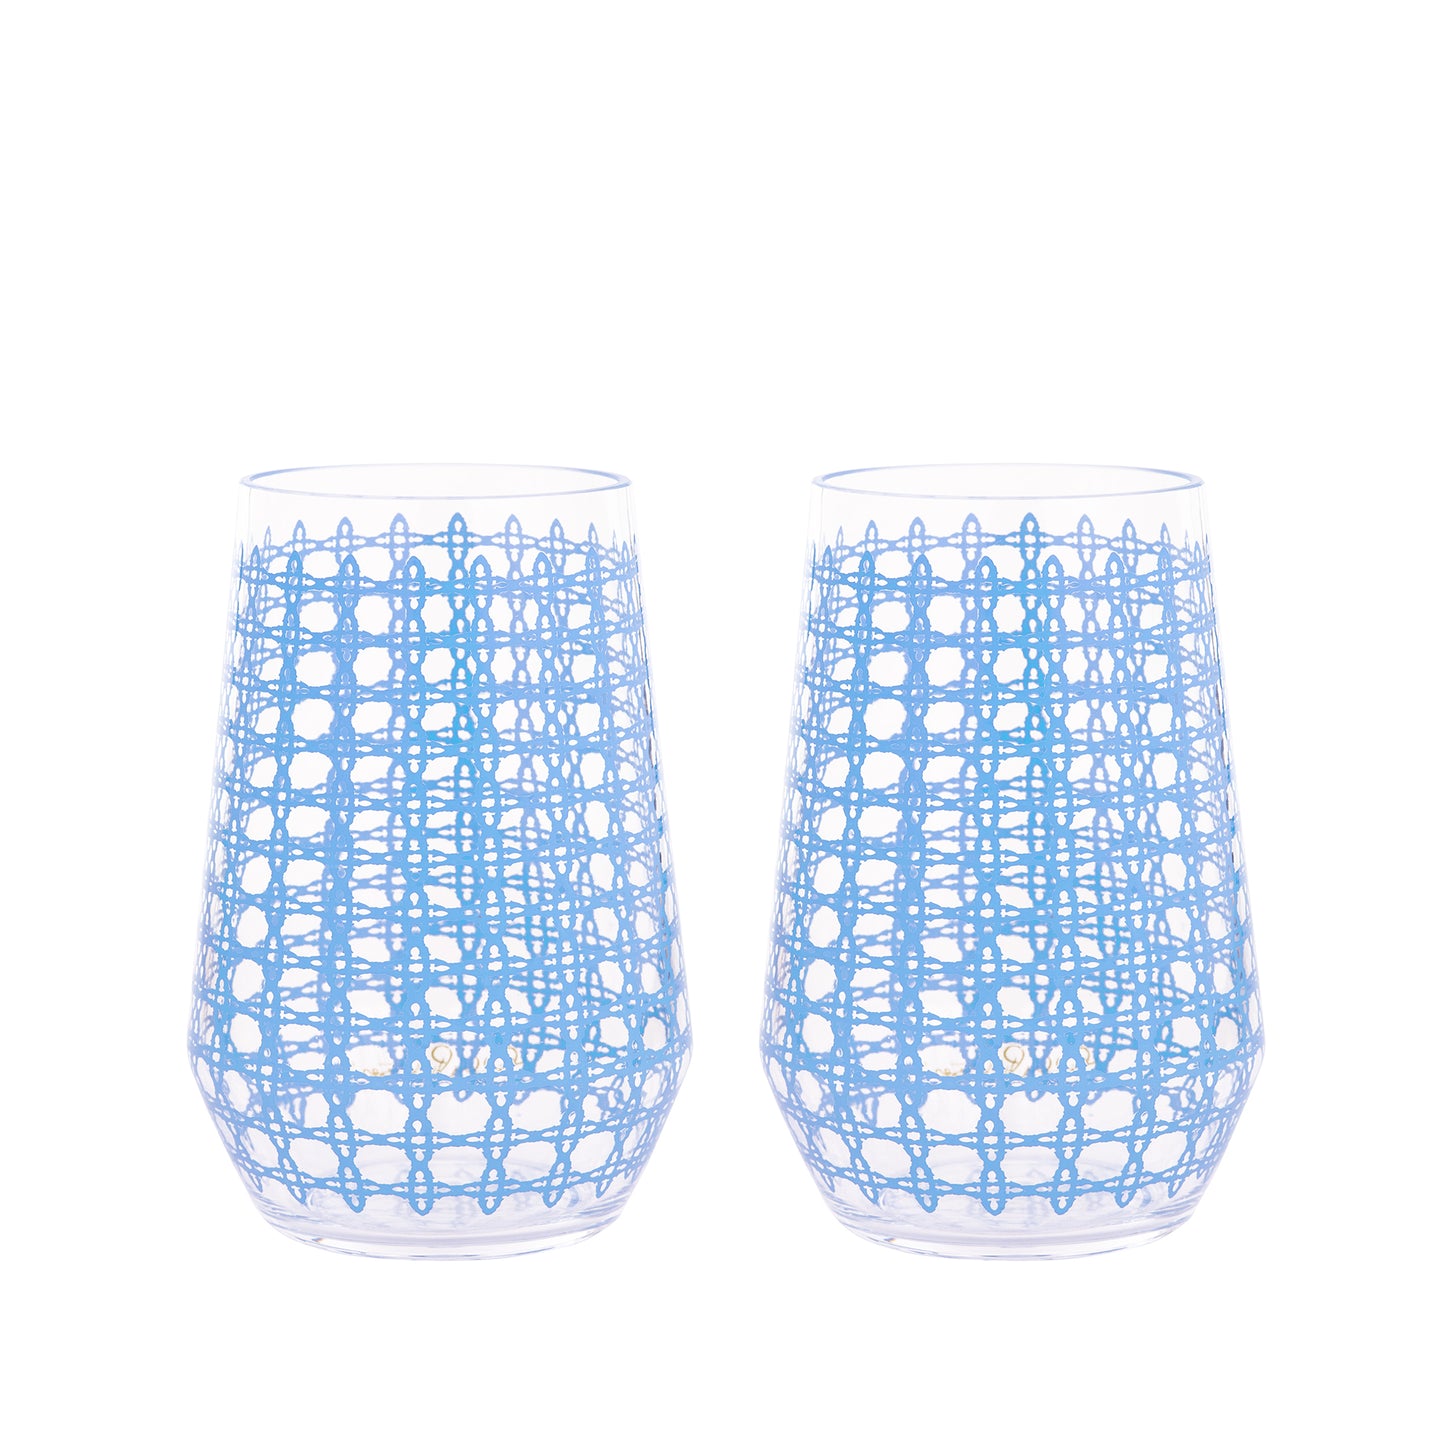 WINE GLASS SET - BLUE CANING